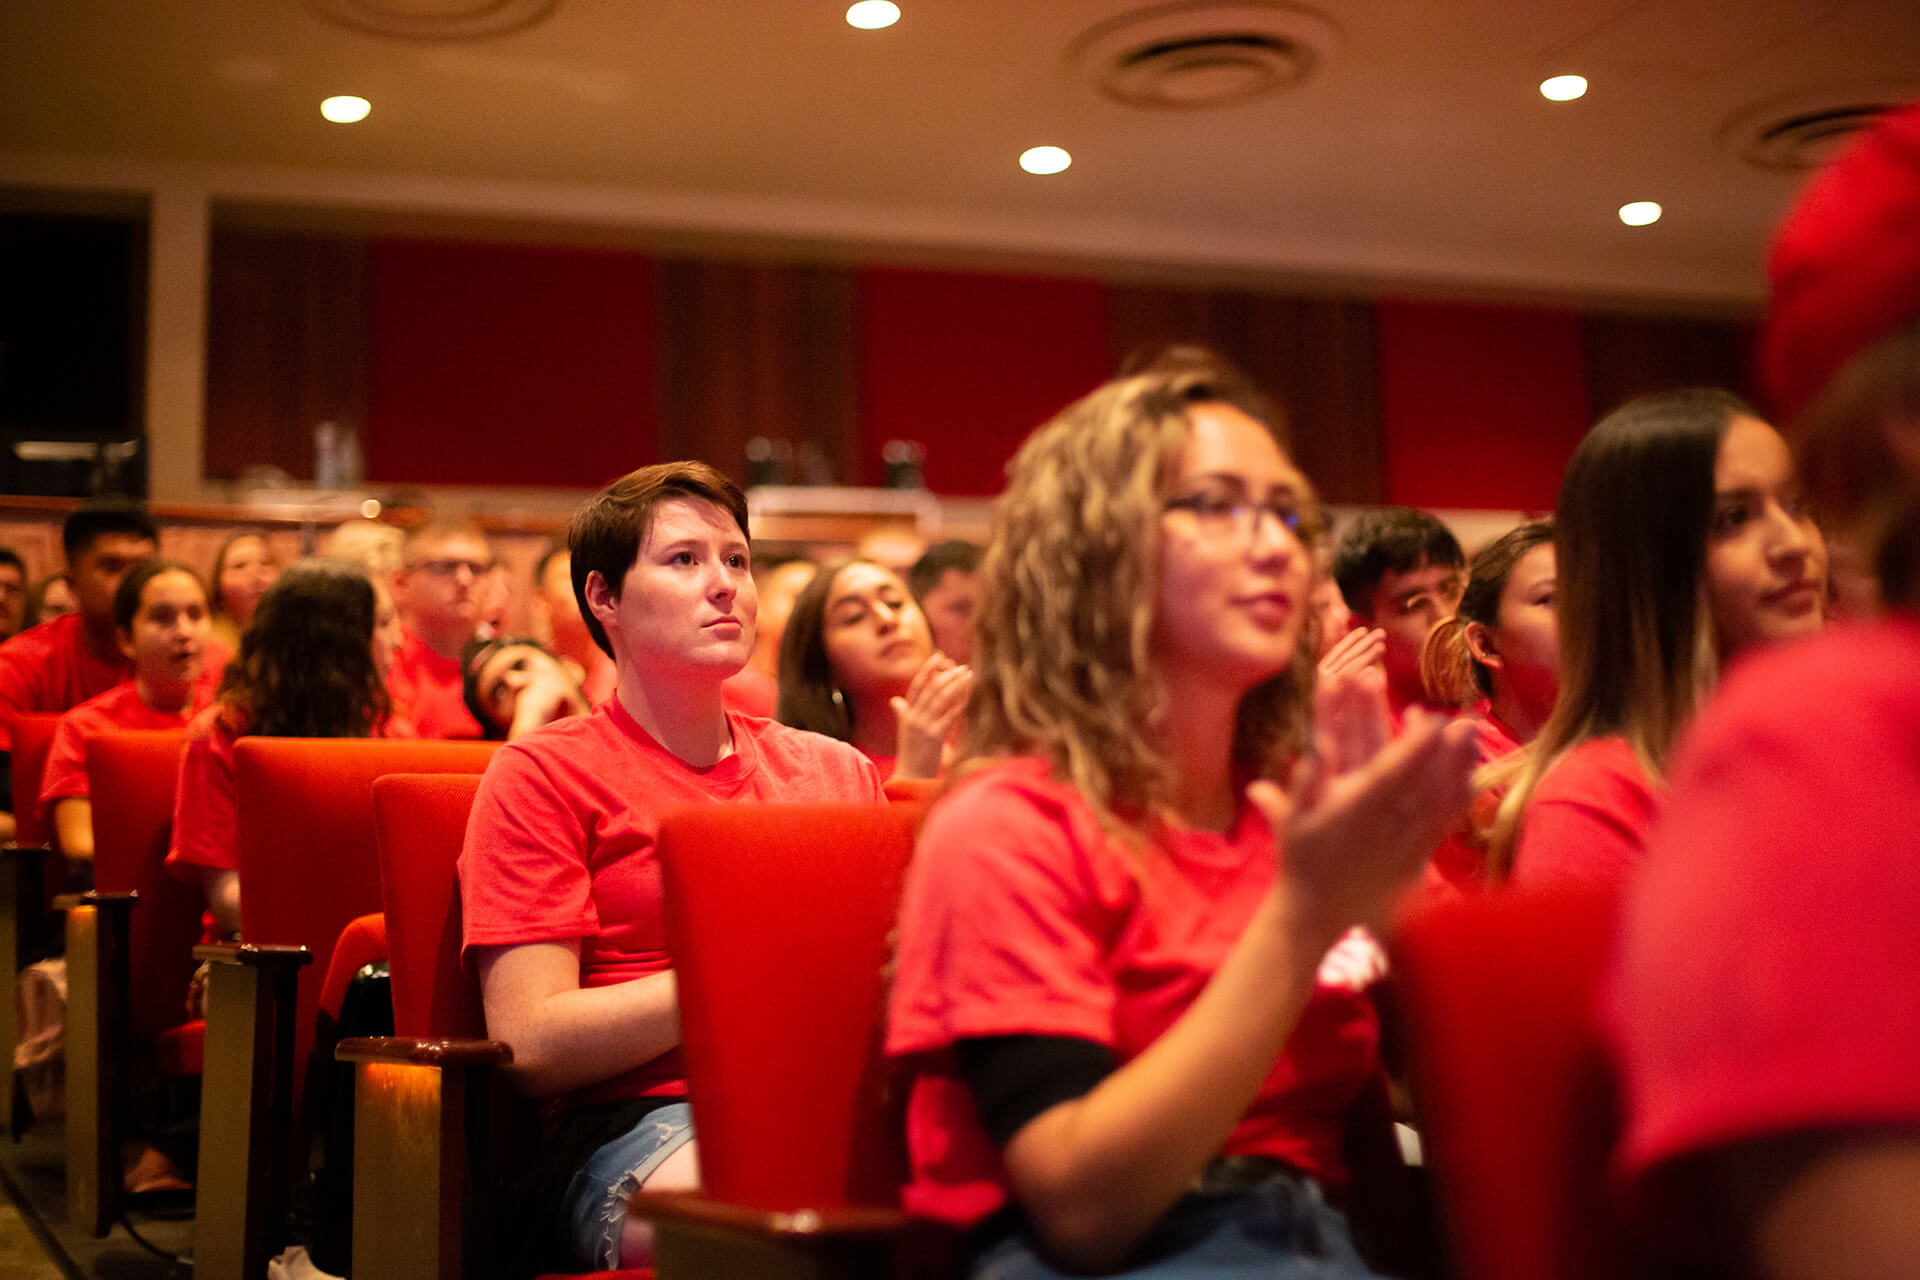 students in auditorium, image focused on one student